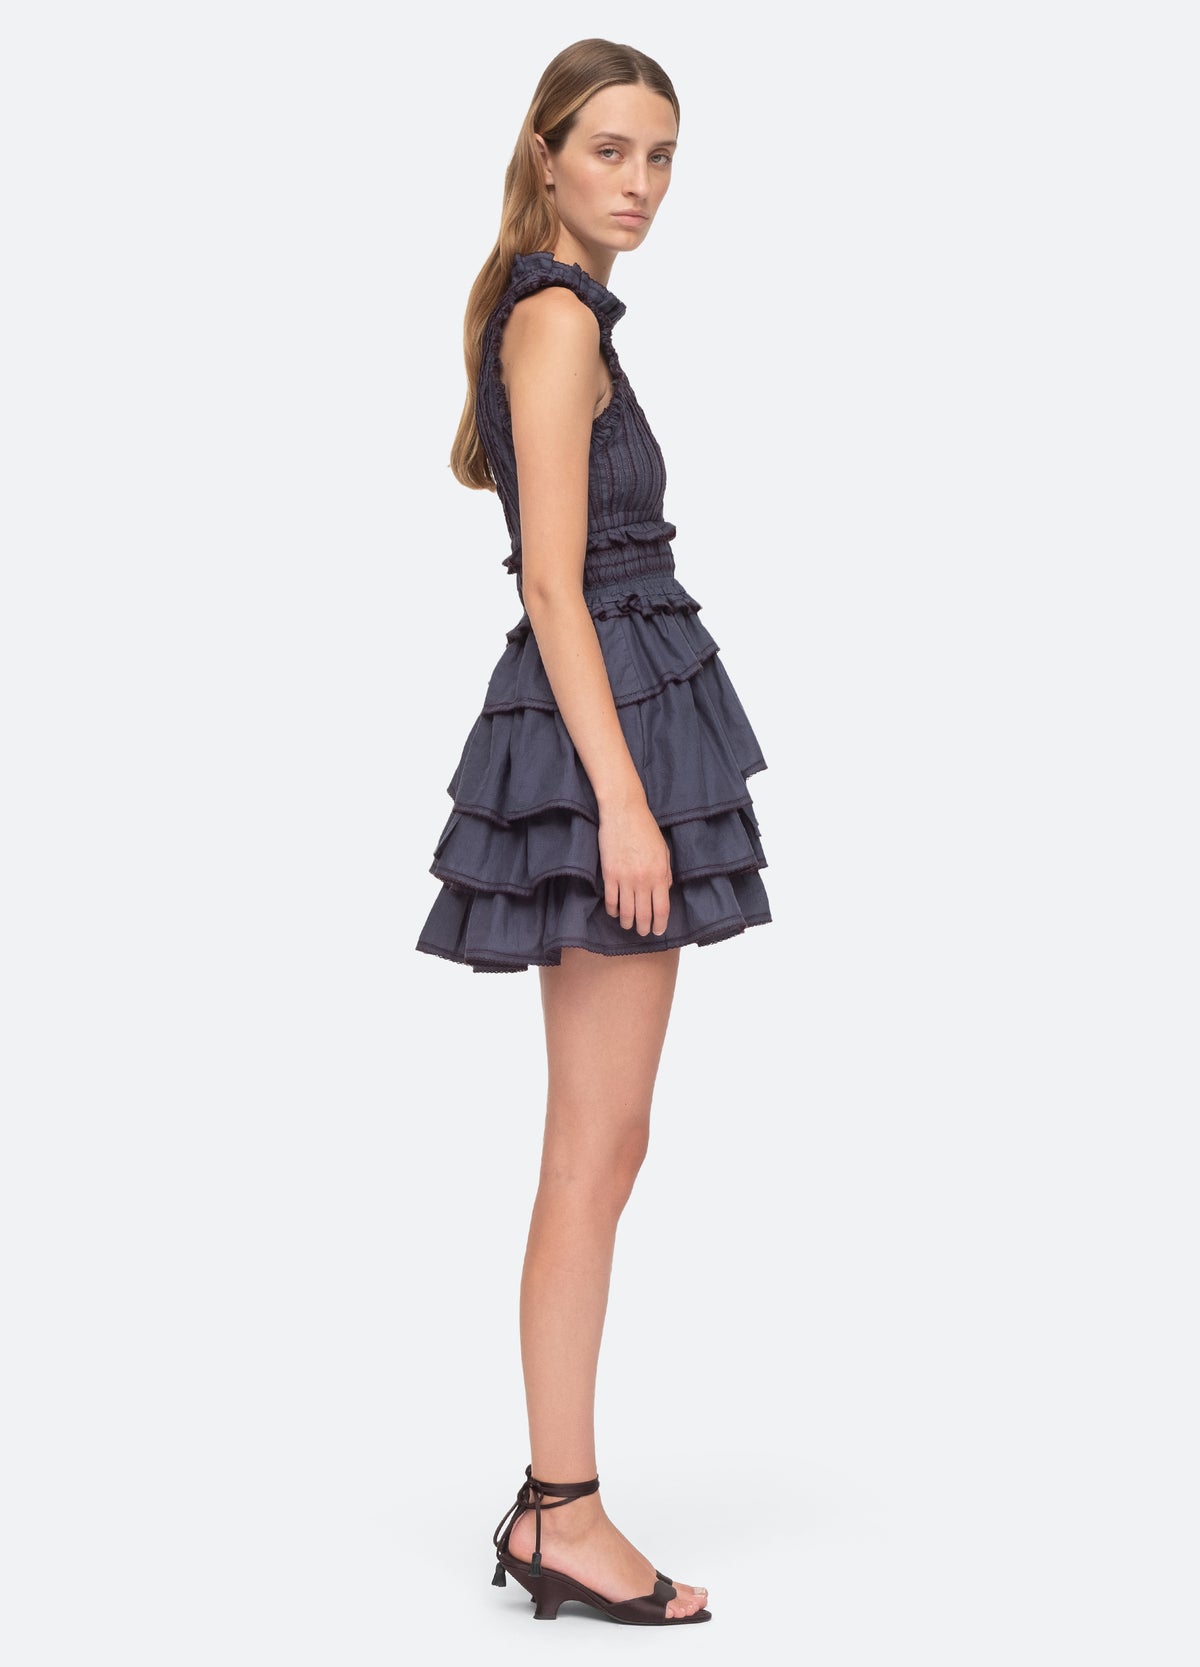 admiral-mable dress-side view - 4